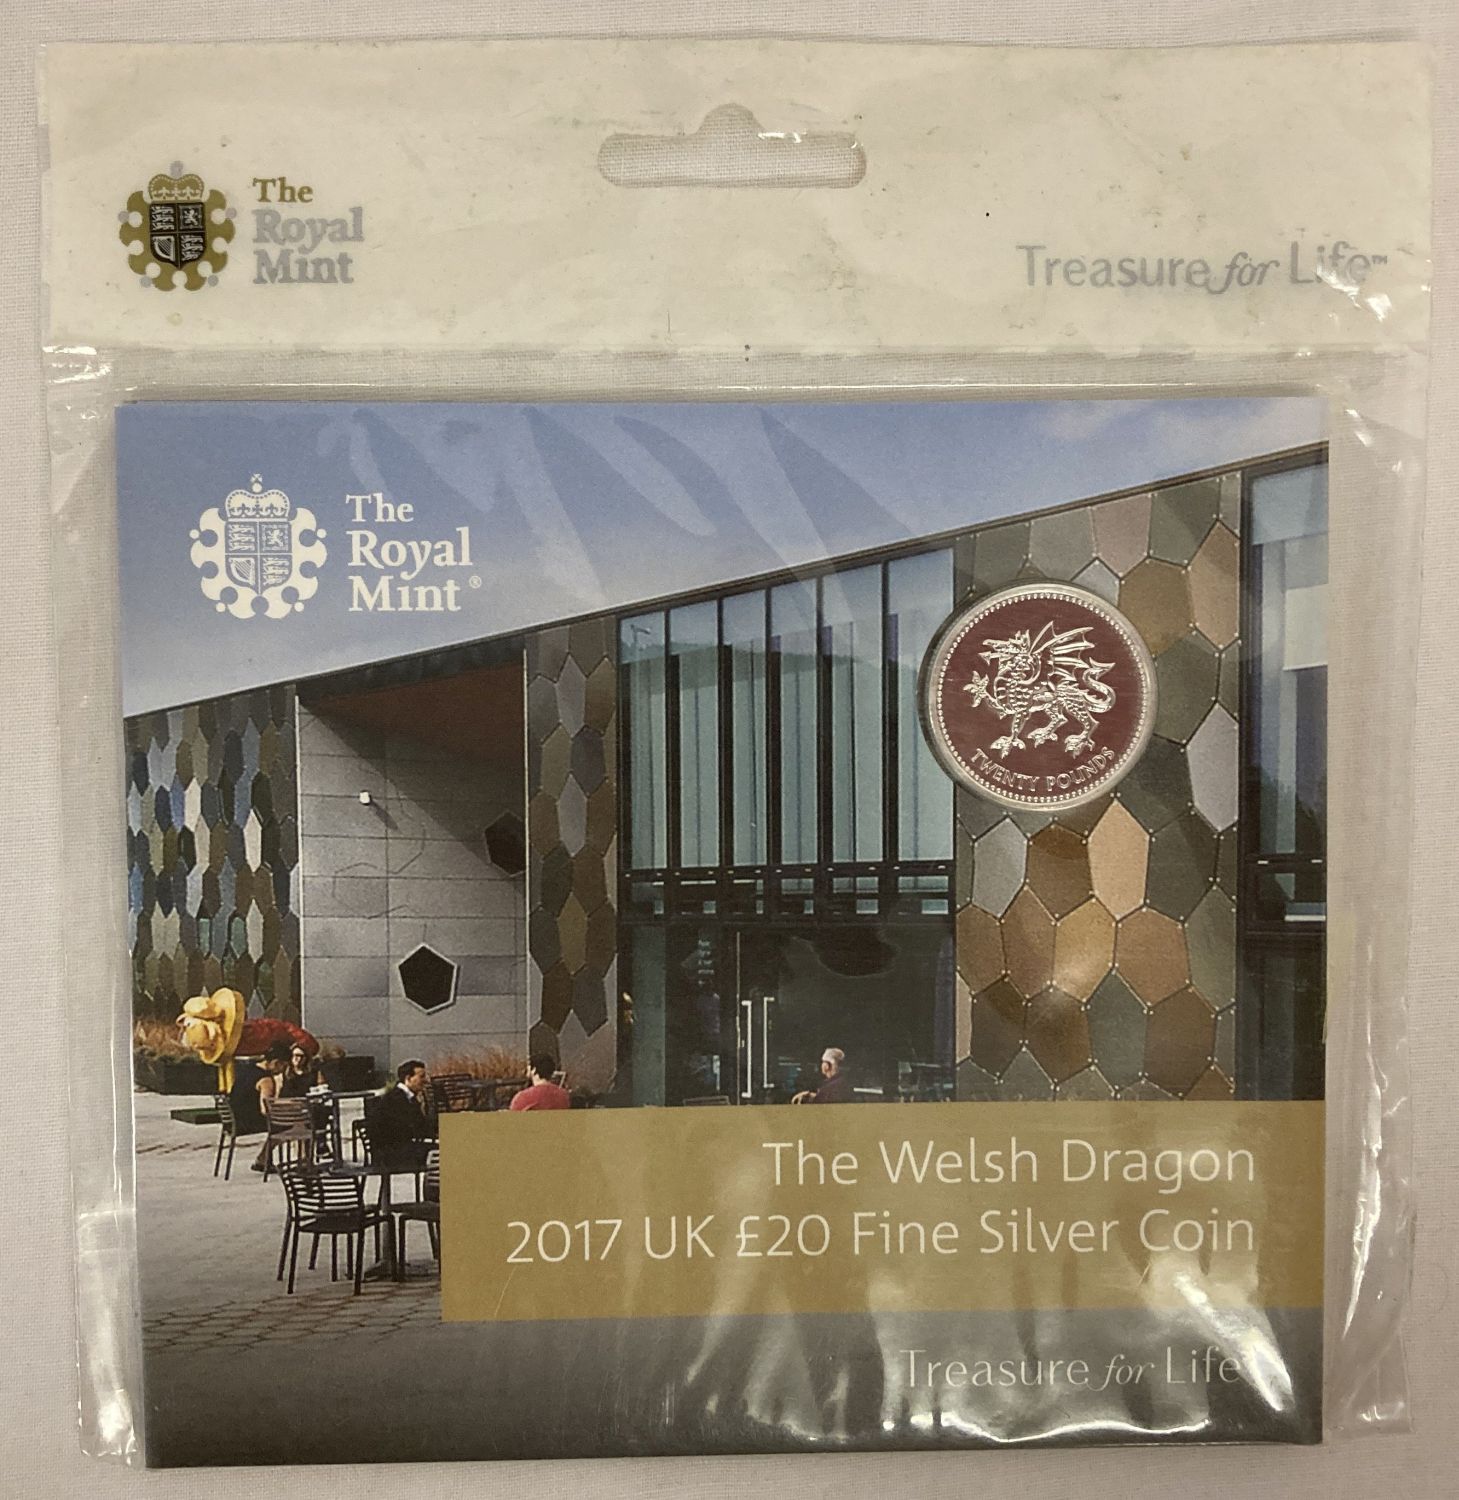 A sealed and carded Royal Mint 2017 fine silver The Welsh Dragon £20 coin.